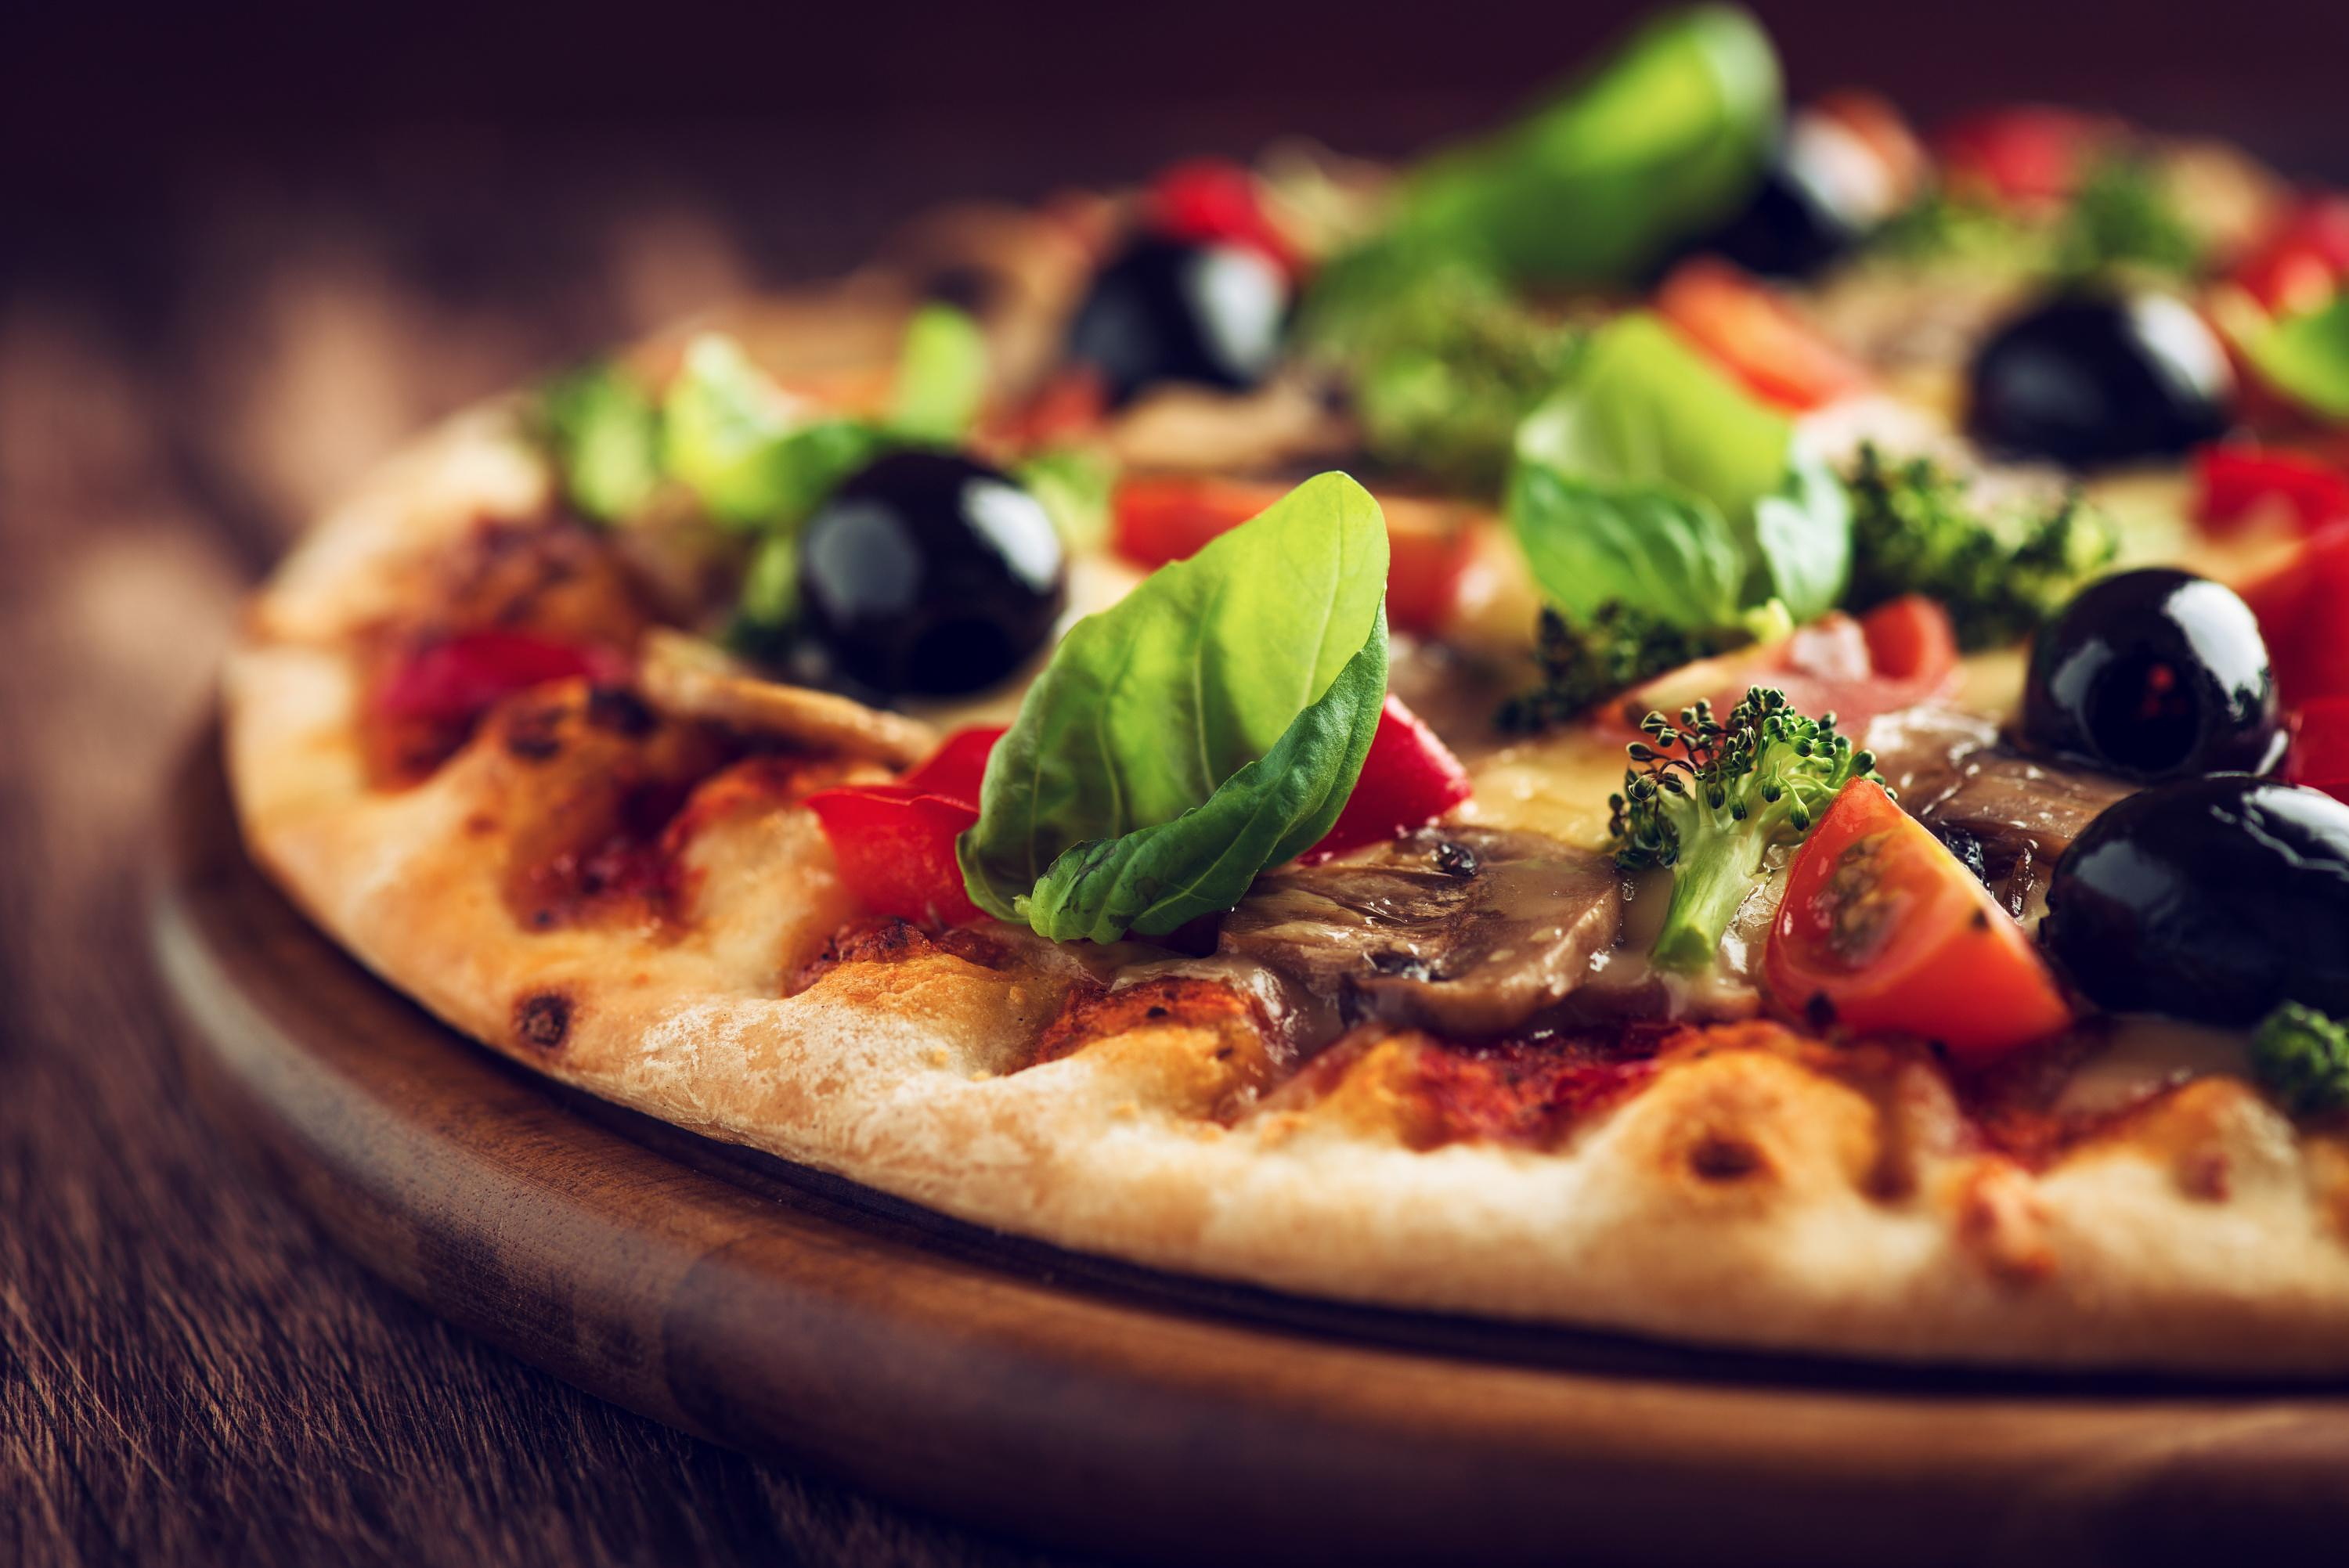 Pizzas sold throughout France recalled for “possible presence” of glass debris